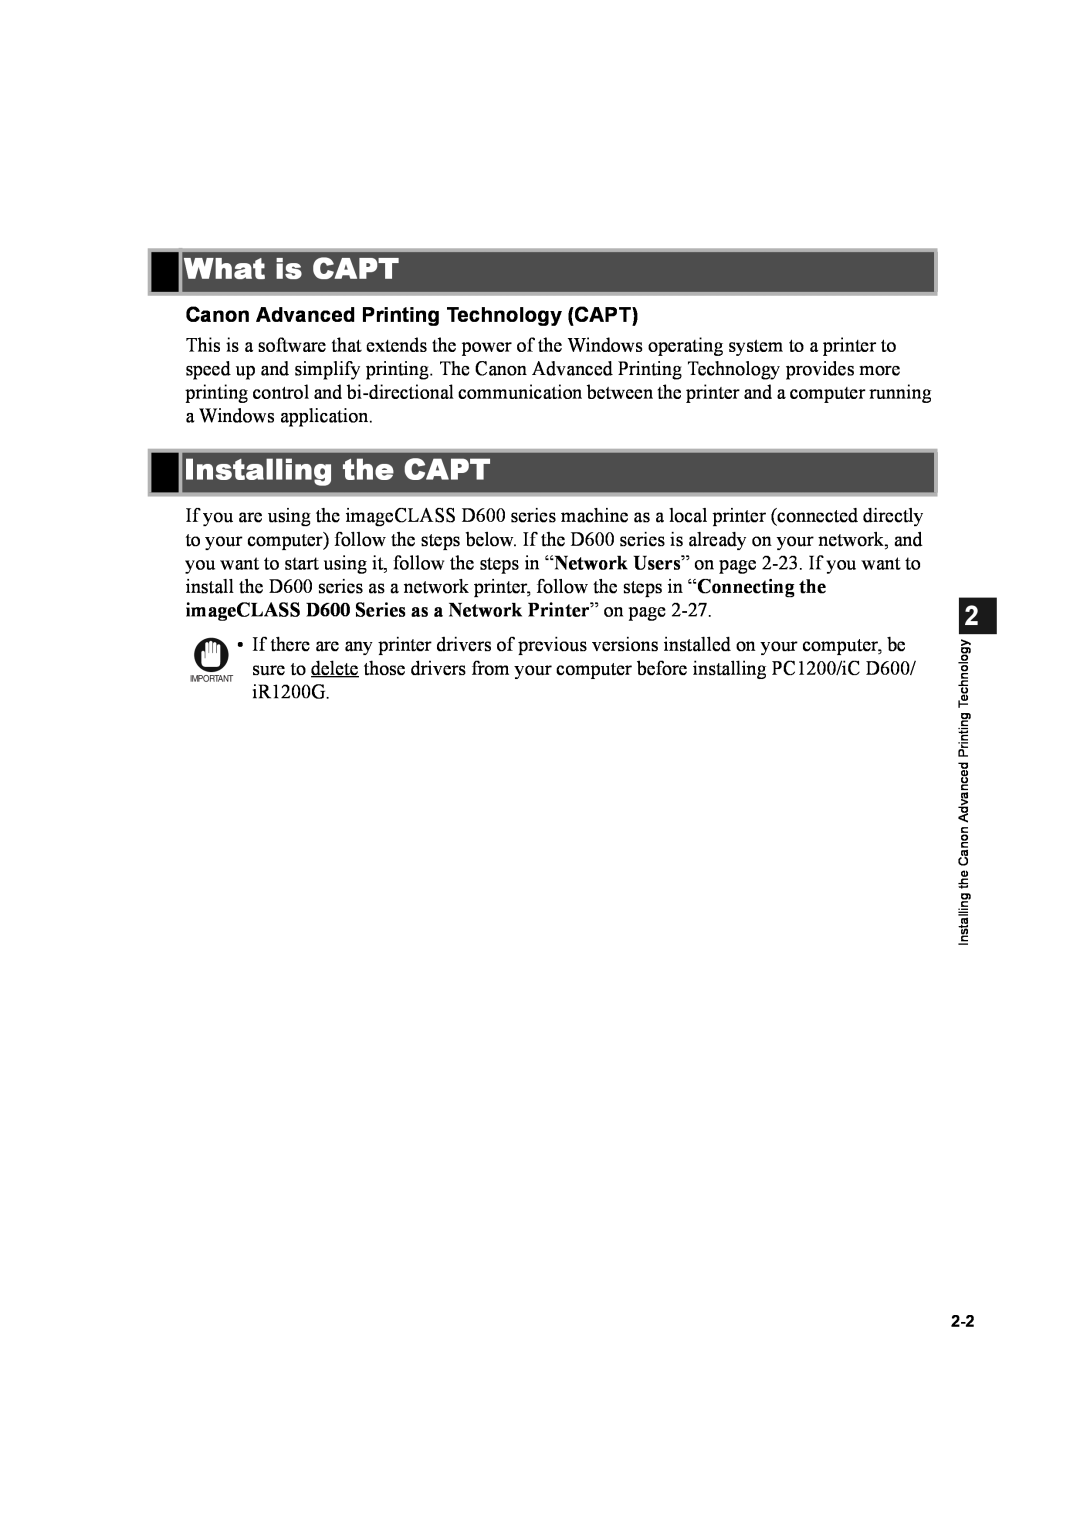 Canon D600 manual What is CAPT, Installing the CAPT, Canon Advanced Printing Technology CAPT 